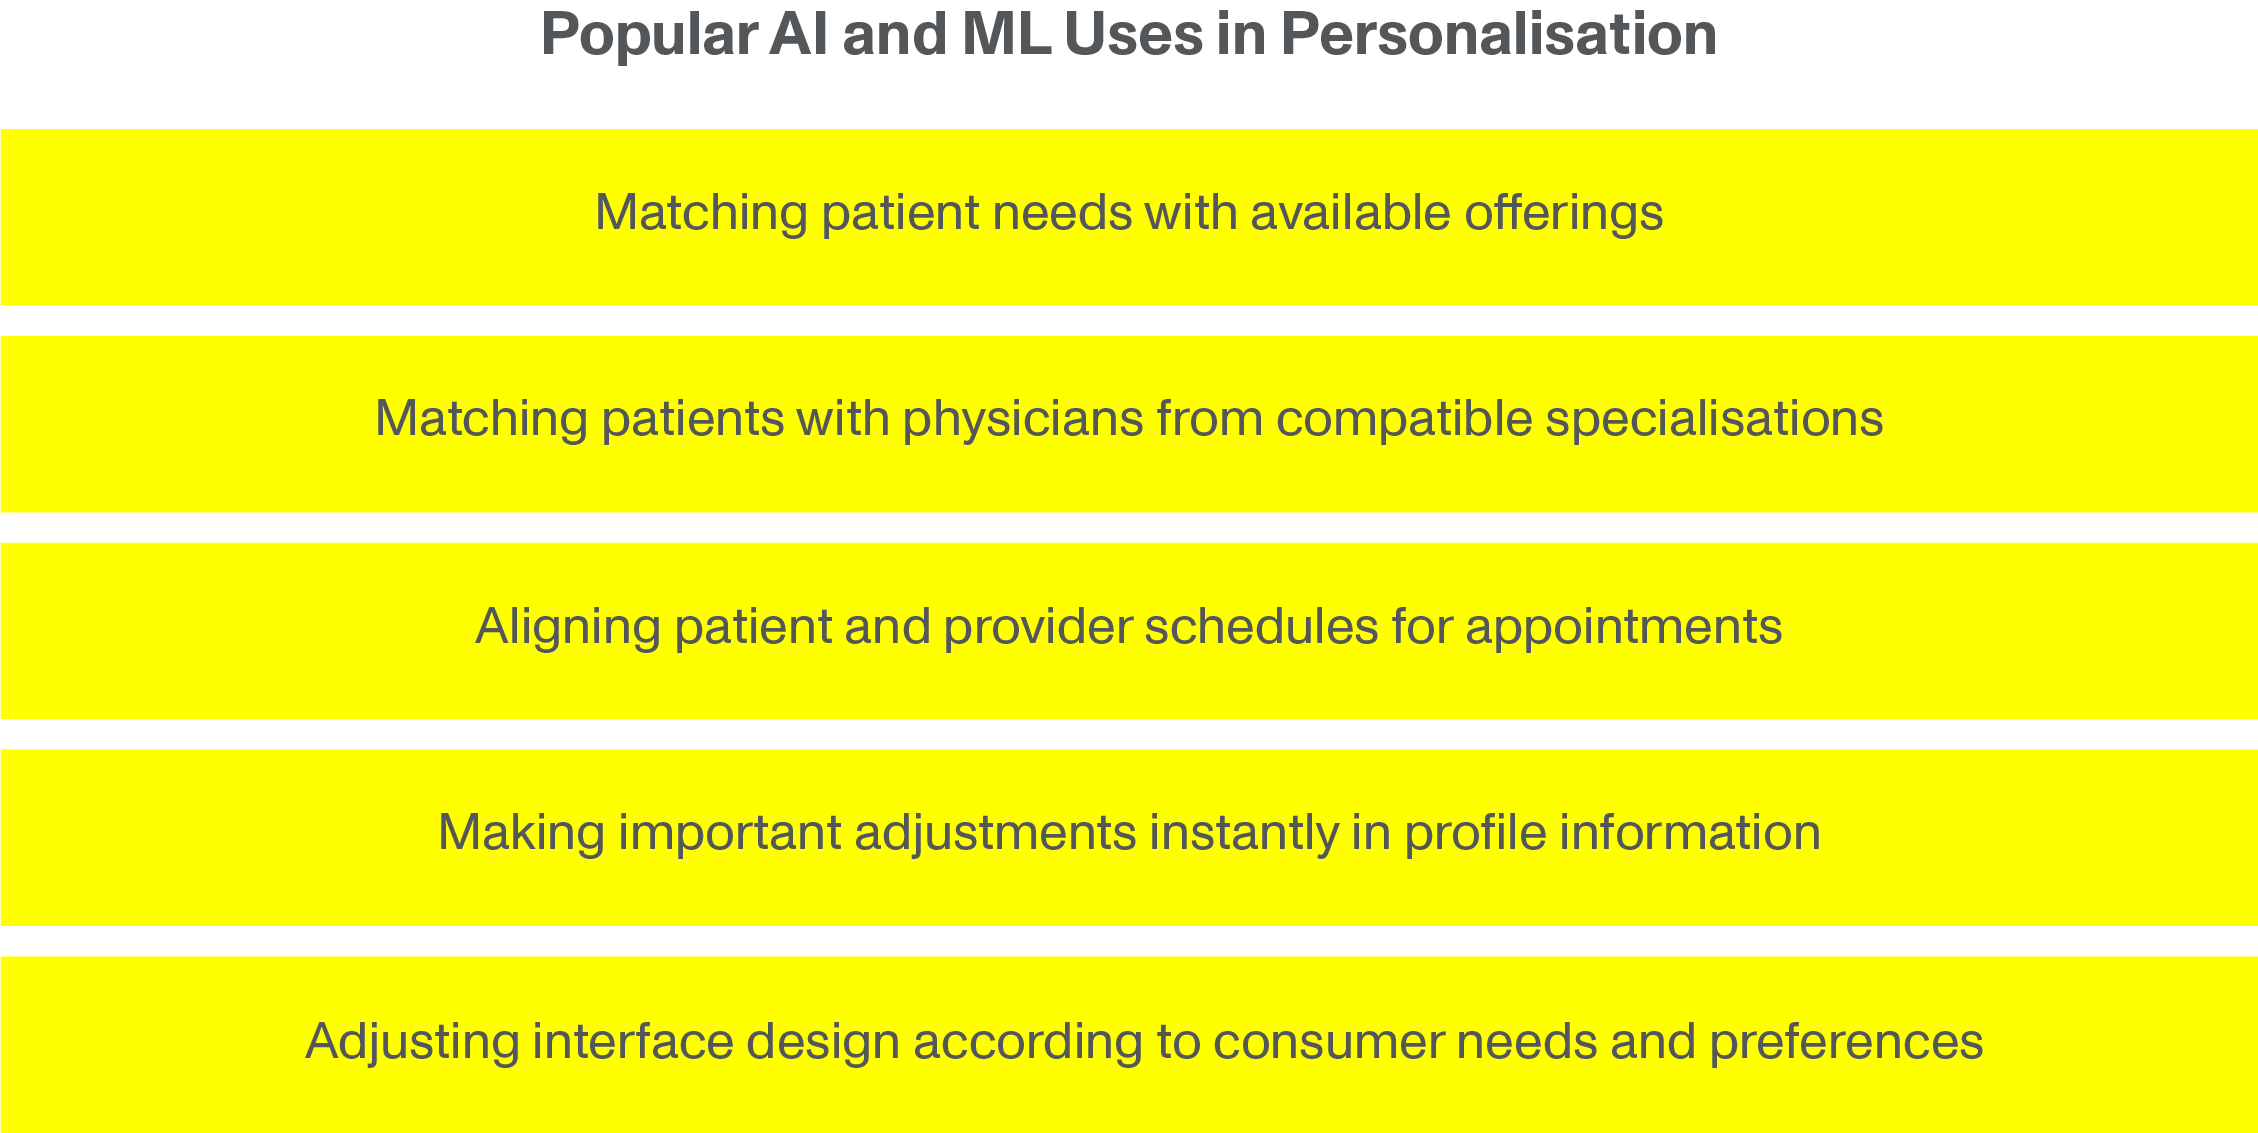 Popular AI and ML Uses in Personalisation